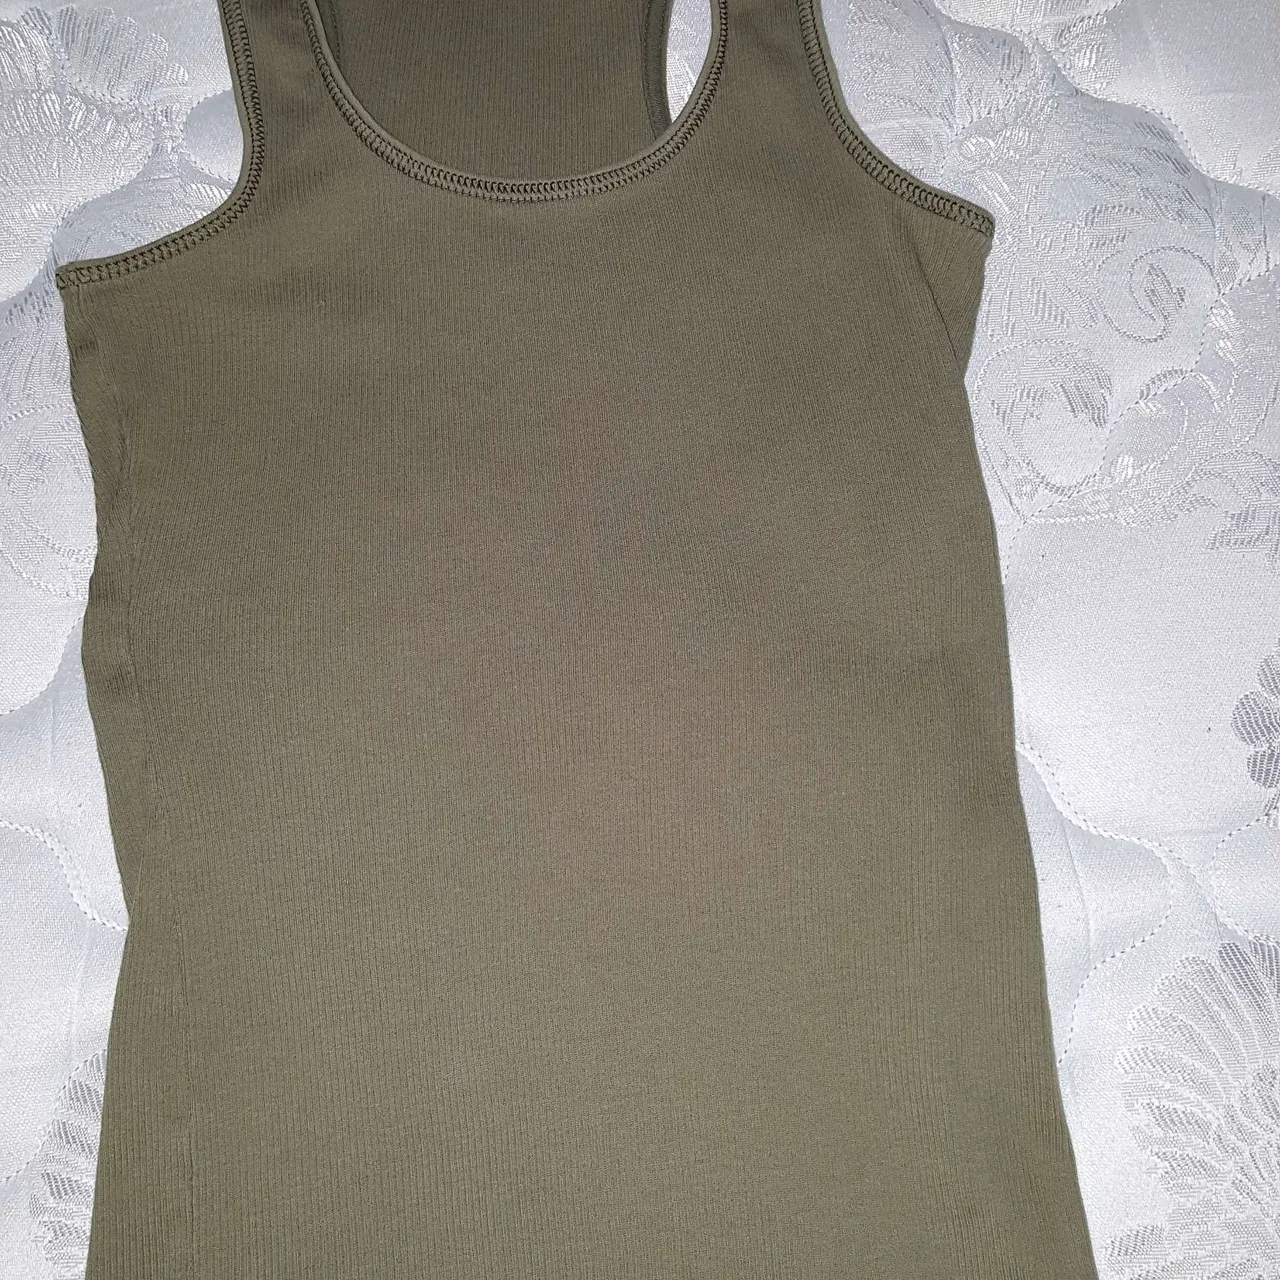 green tank top -- says size large but could fit smaller for a... photo 1